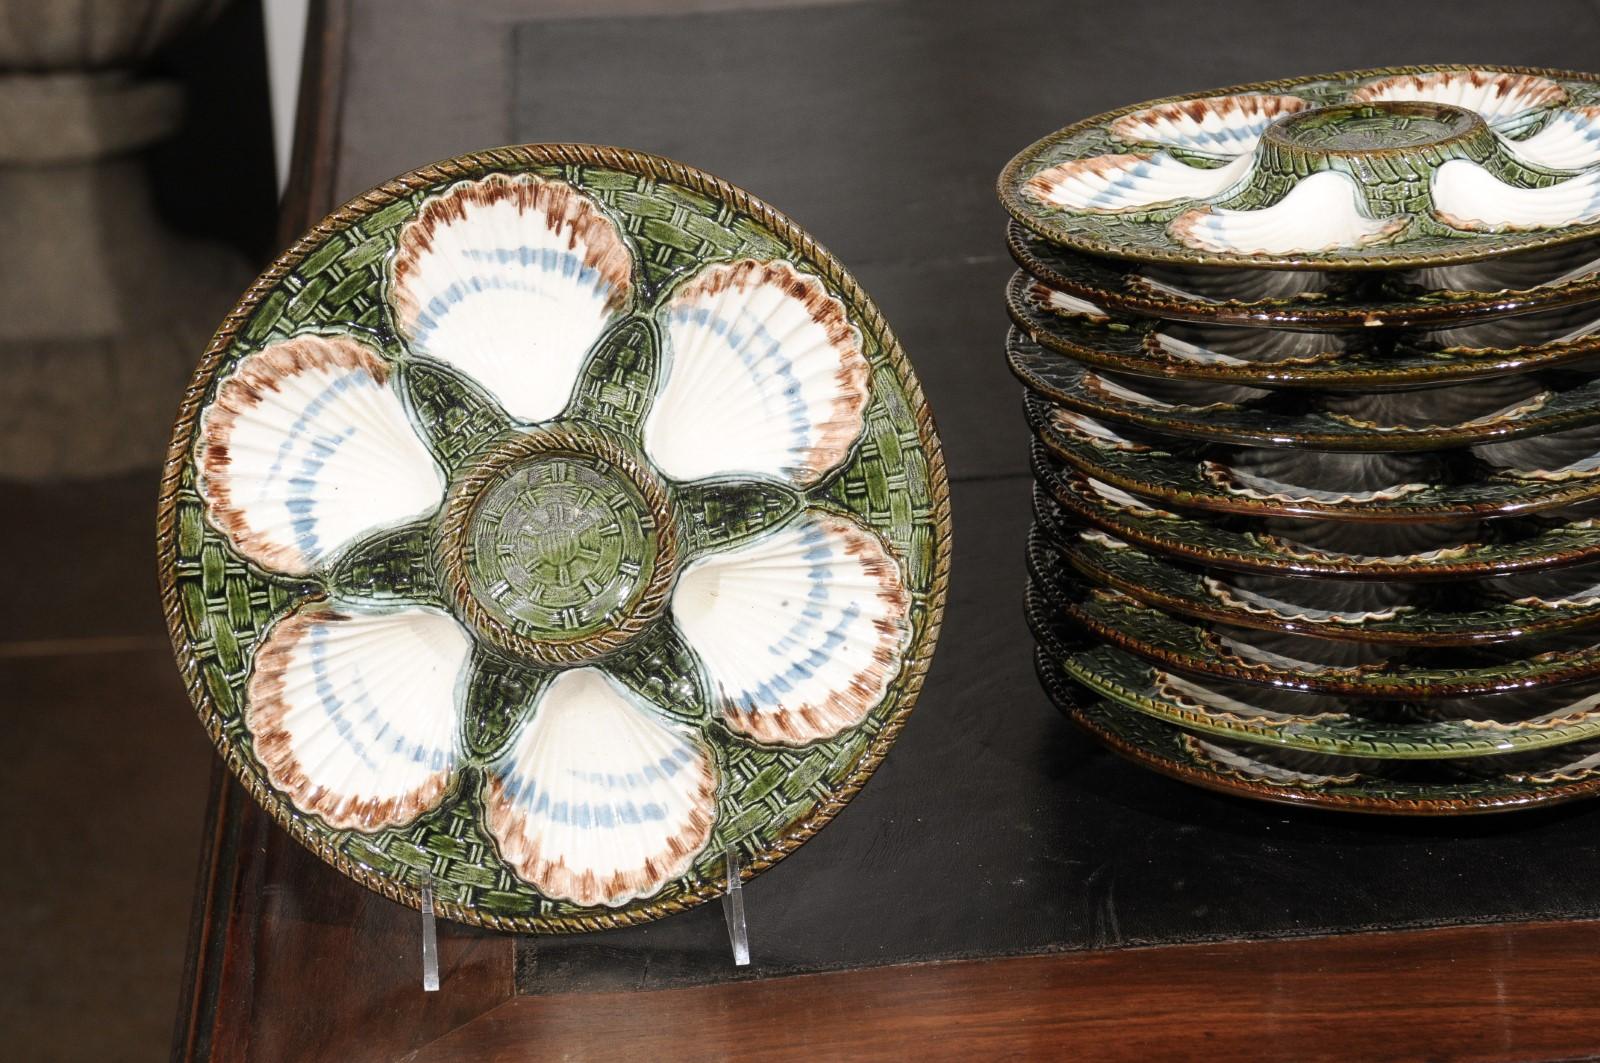 19th Century French Majolica Longchamp Terre de Fer Green Scallop Plates, 5 Available